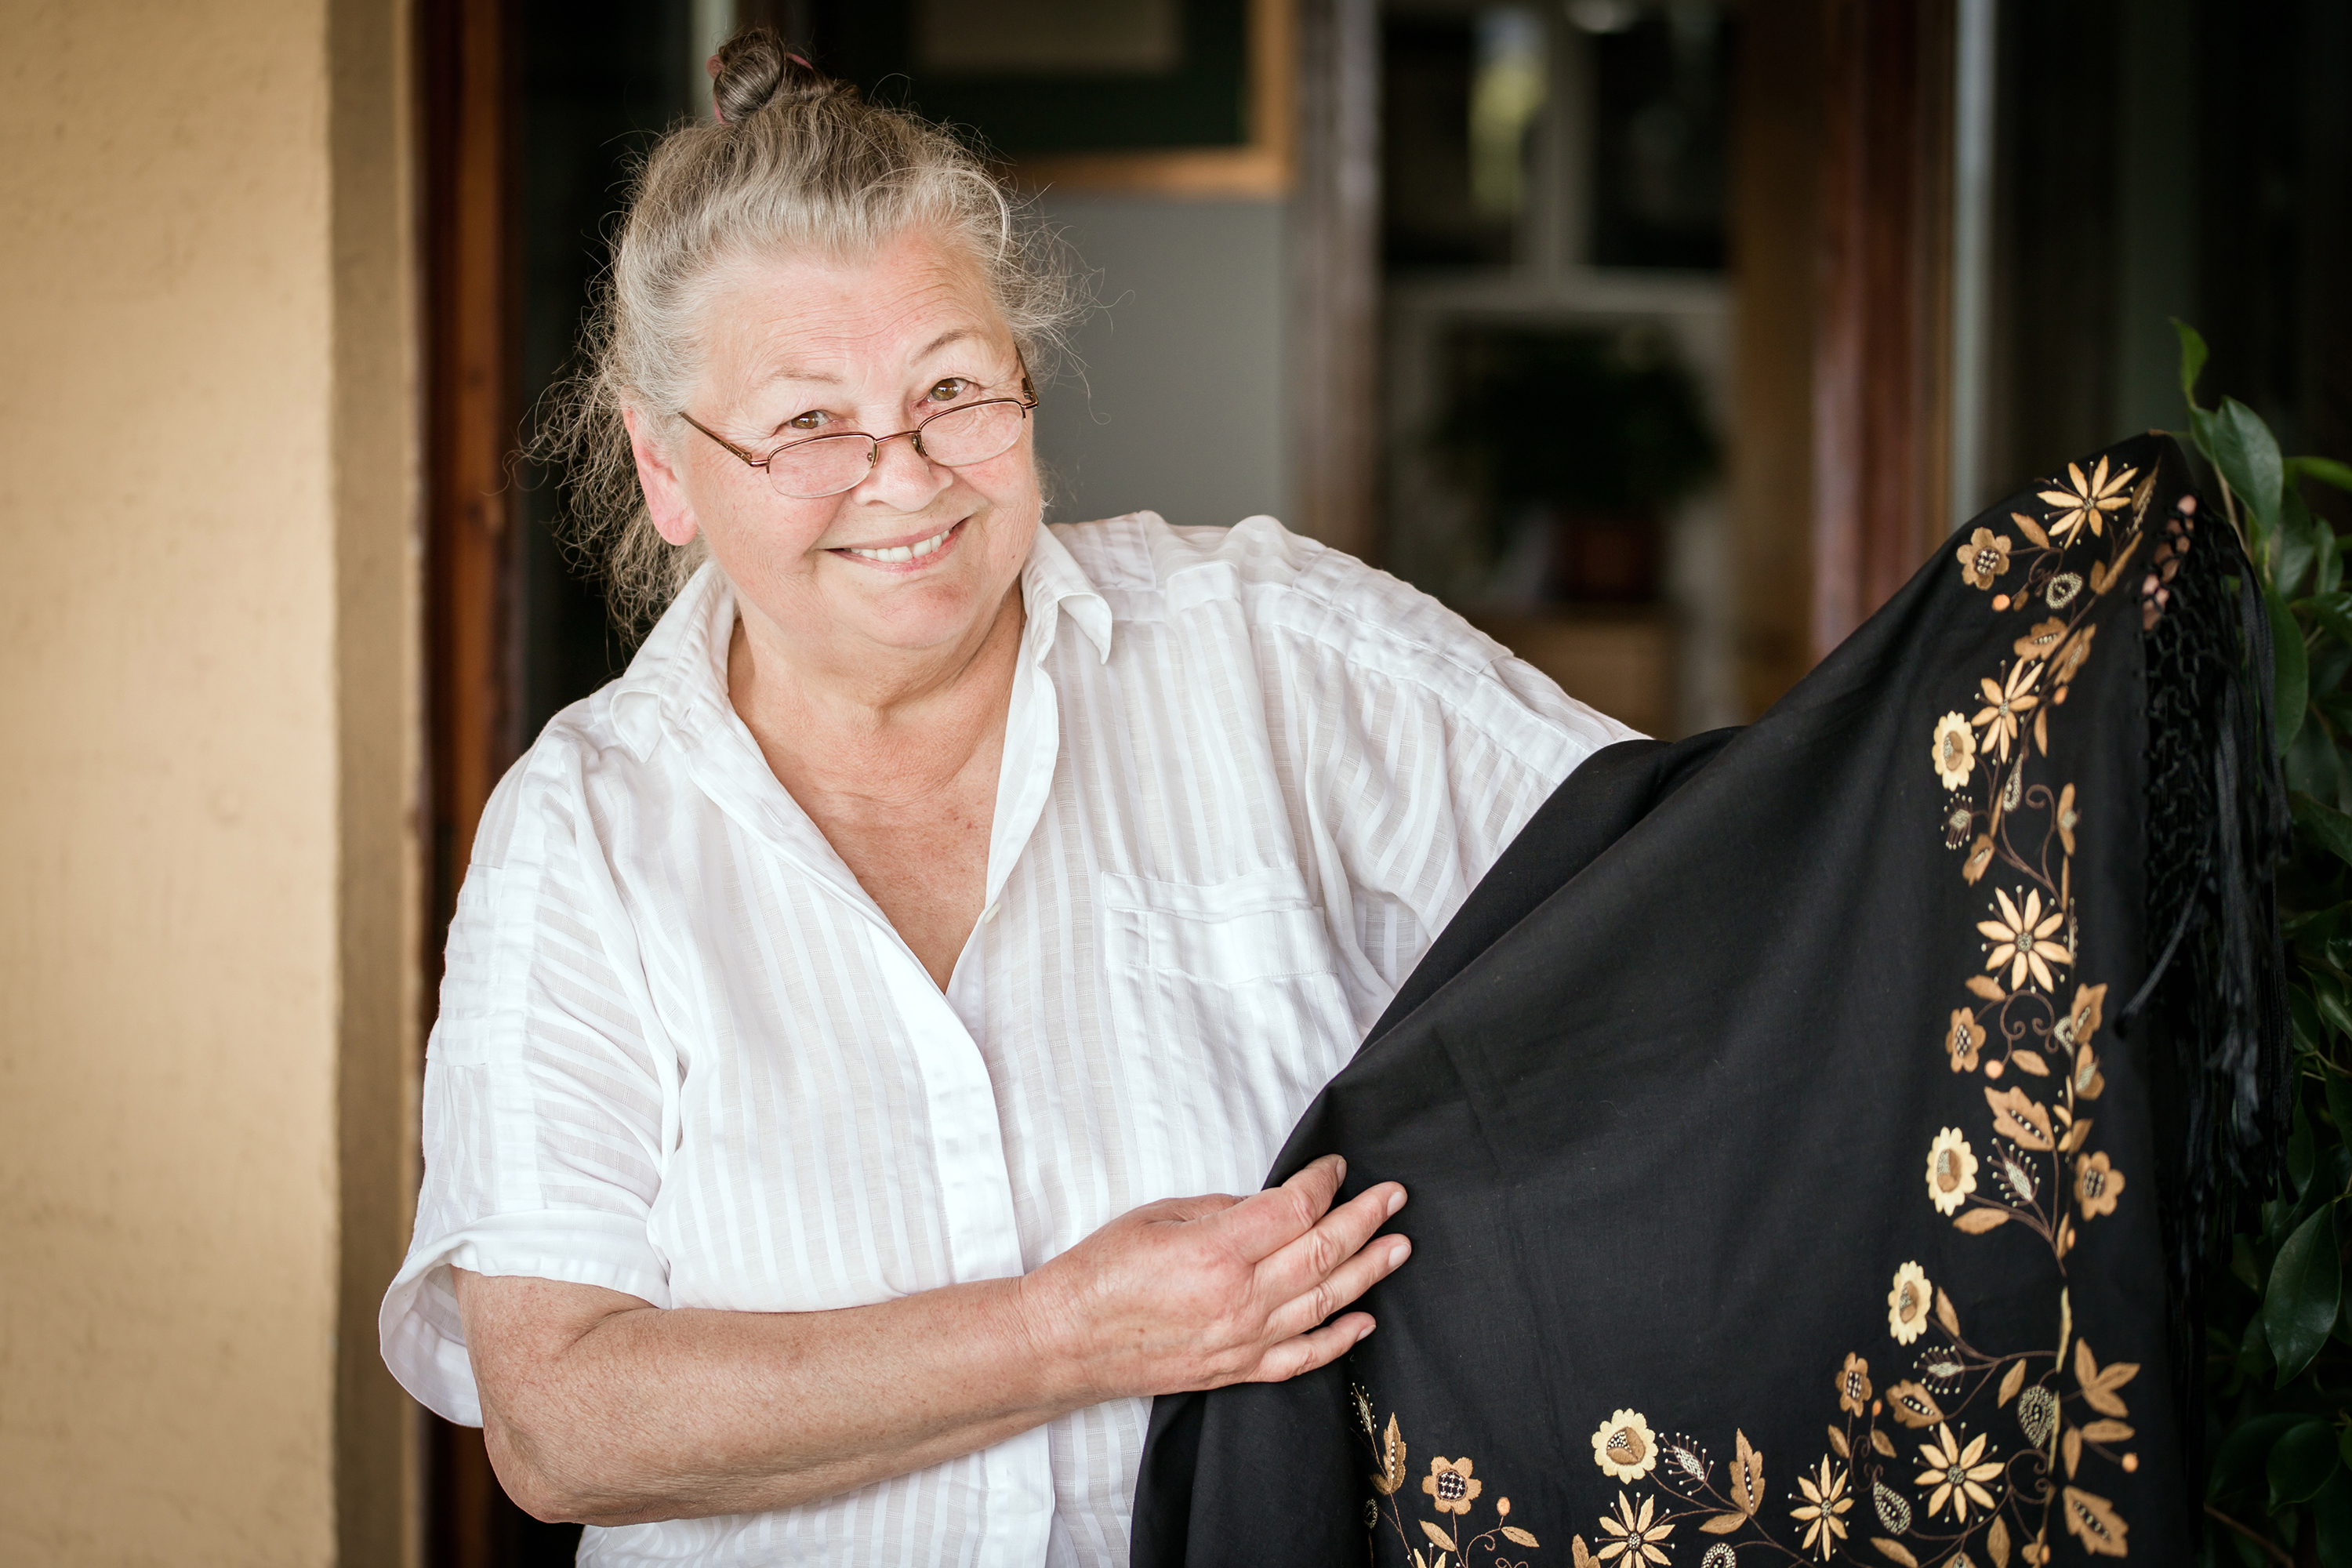 Black scarf with the Kashubian embroidery, Tuchola school.